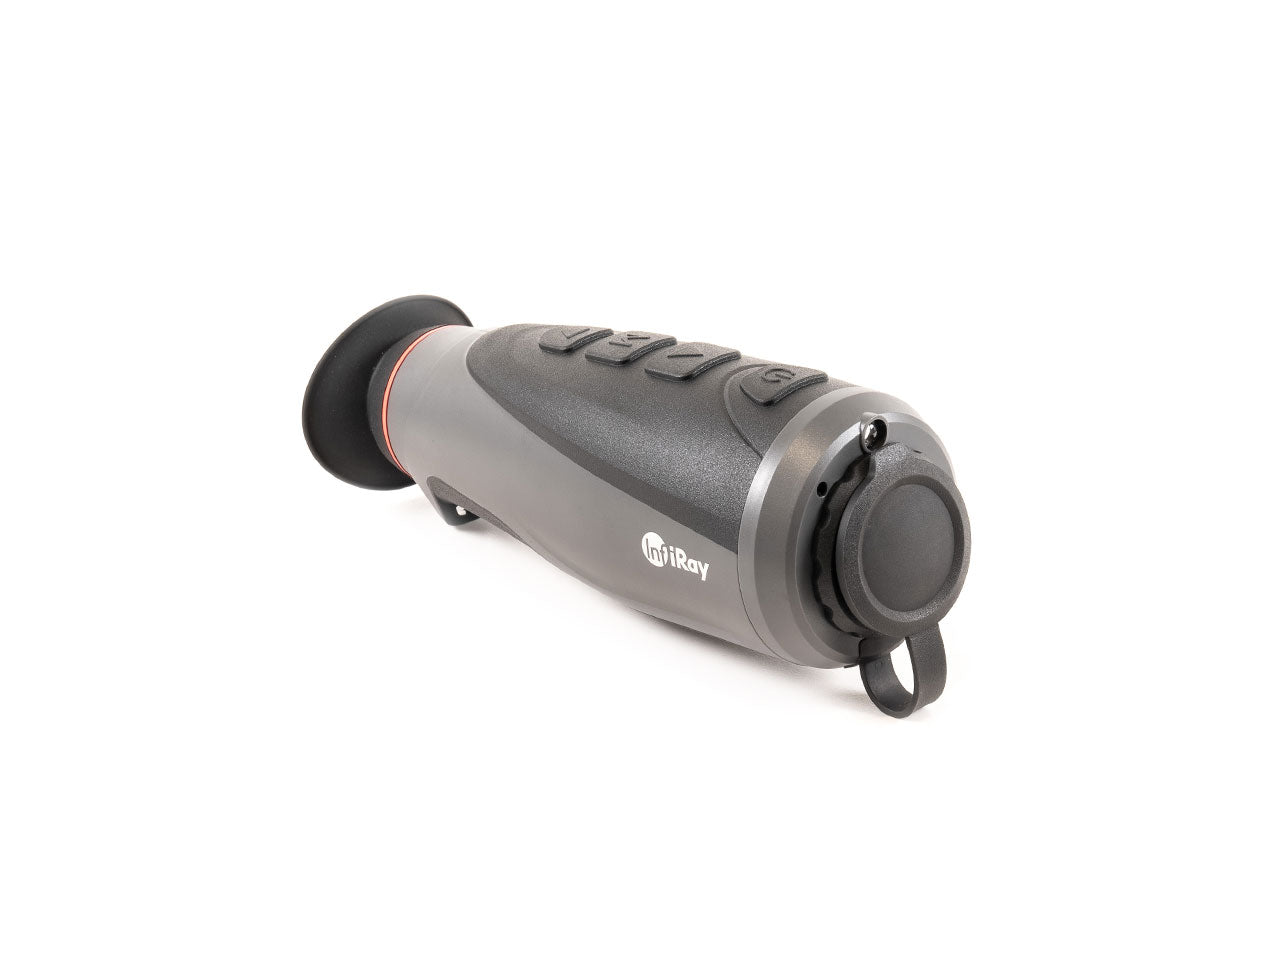 InfiRay Outdoor AFFO R+ AP13 Thermal Monocular 256x192 13mm